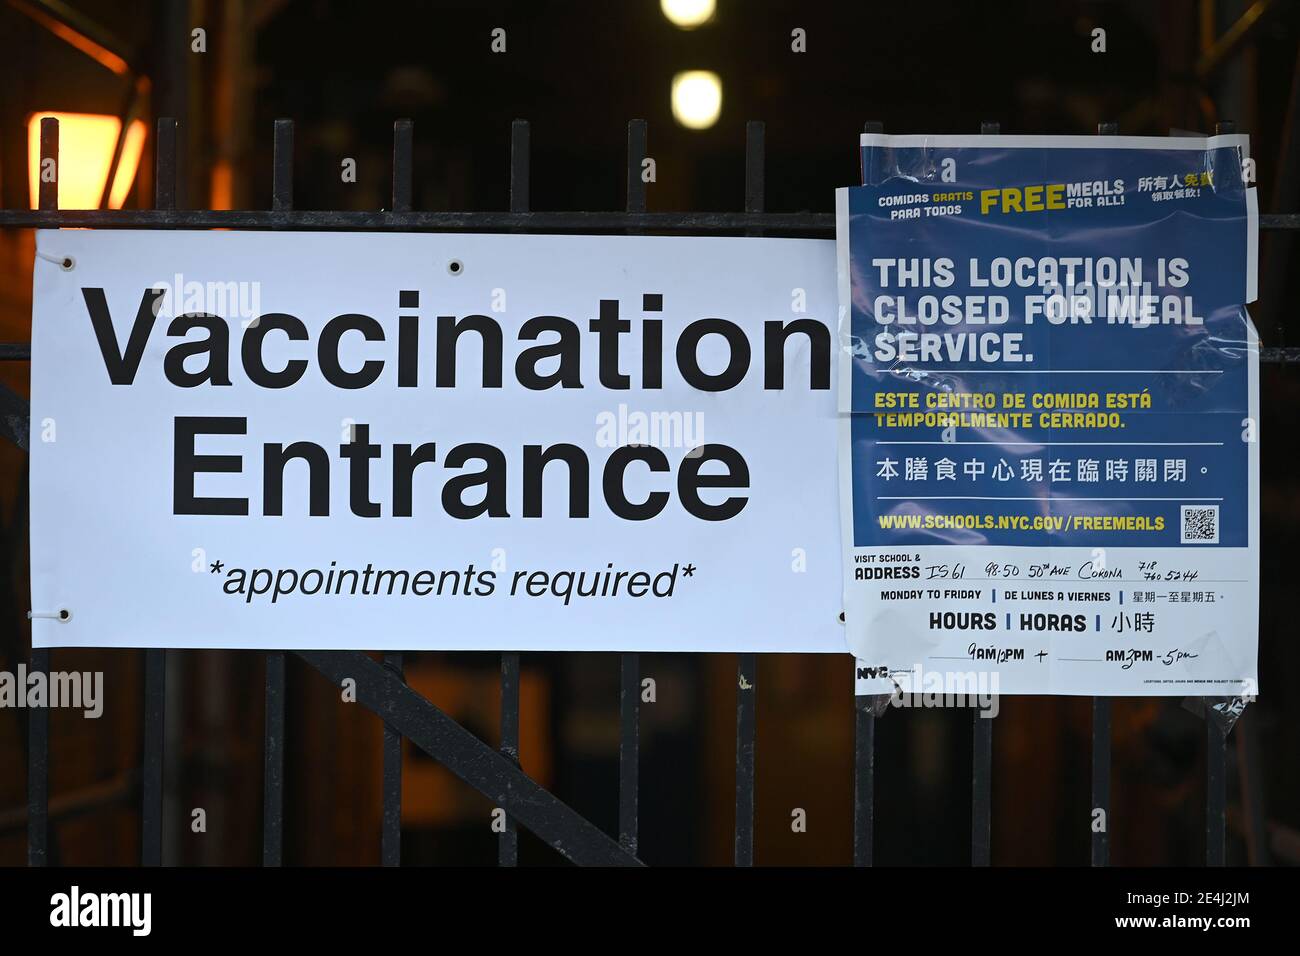 Entrance to a COVID-19 Vaccination Hub in the Elmhurst section of the Queens borough of New York City, NY, January 23, 2021. New York City has ordered 15 if its COVID-19 Vaccinations hubs closed and appointments cancelled due to a shortage of the COVID-19 vaccine; the United States recently surpassed 400,000 deaths due to Coronavirus infections.  (Photo by Anthony Behar/Sipa USA) Stock Photo